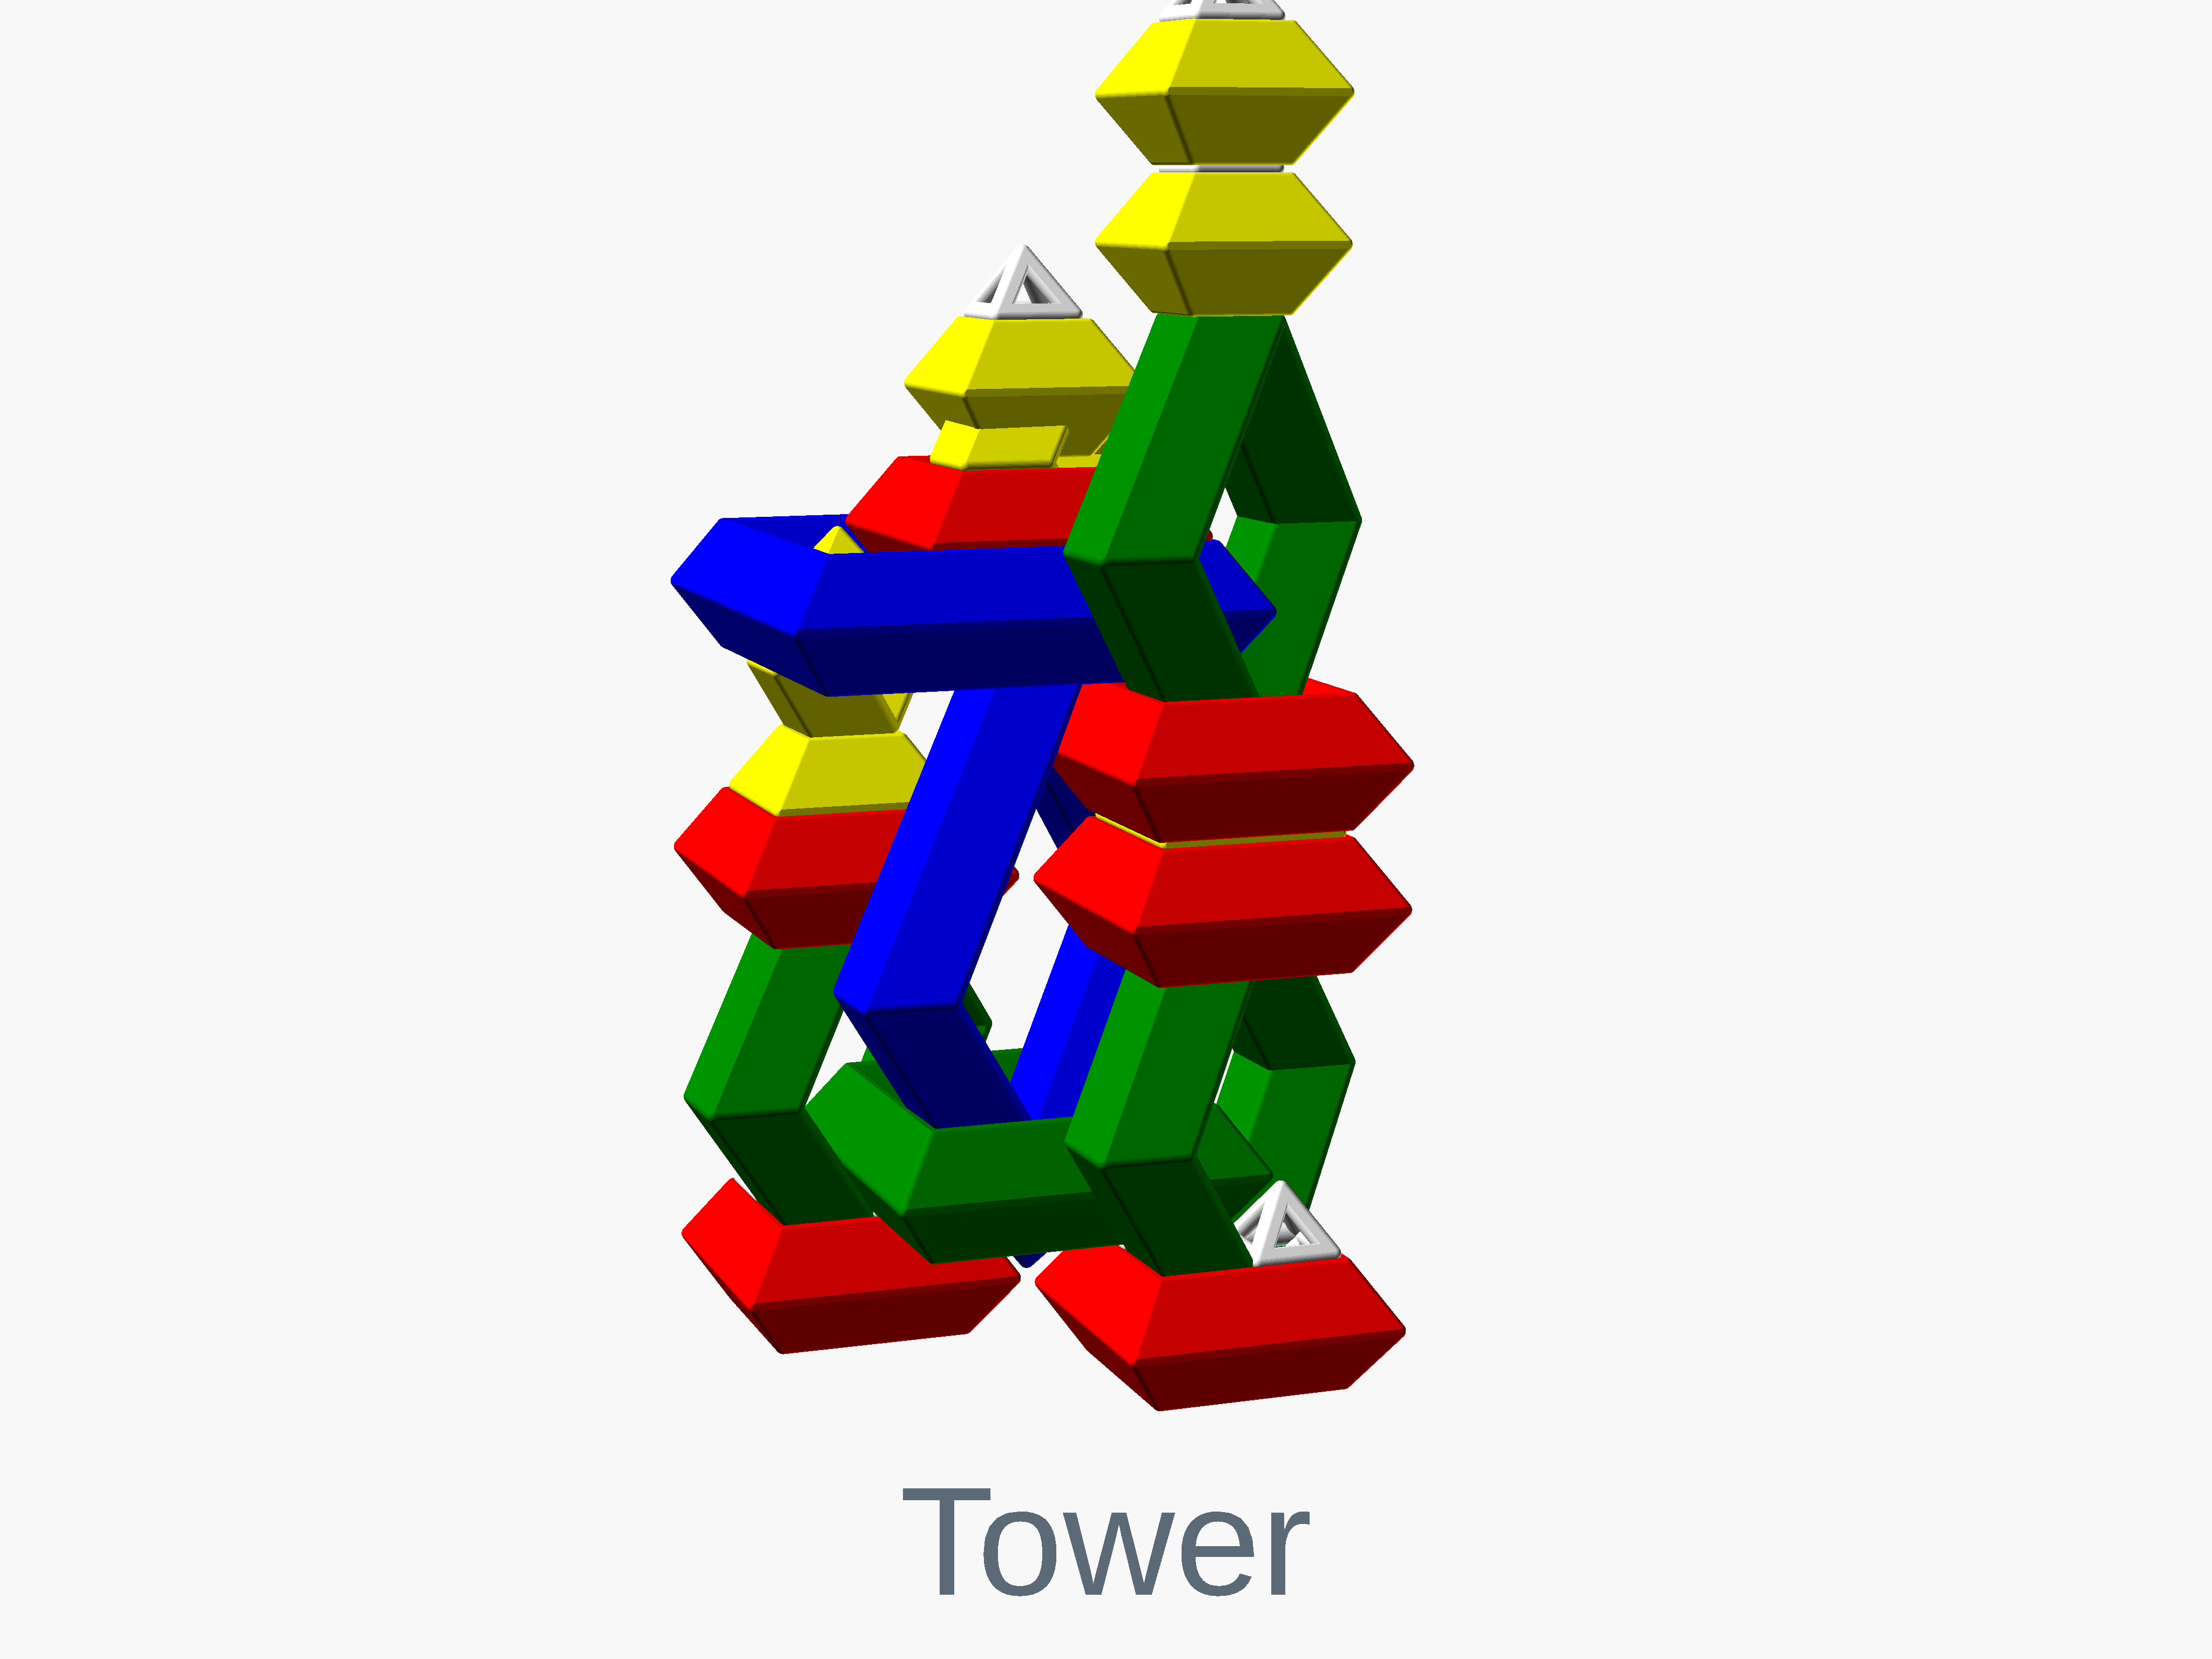 Octahedron tower